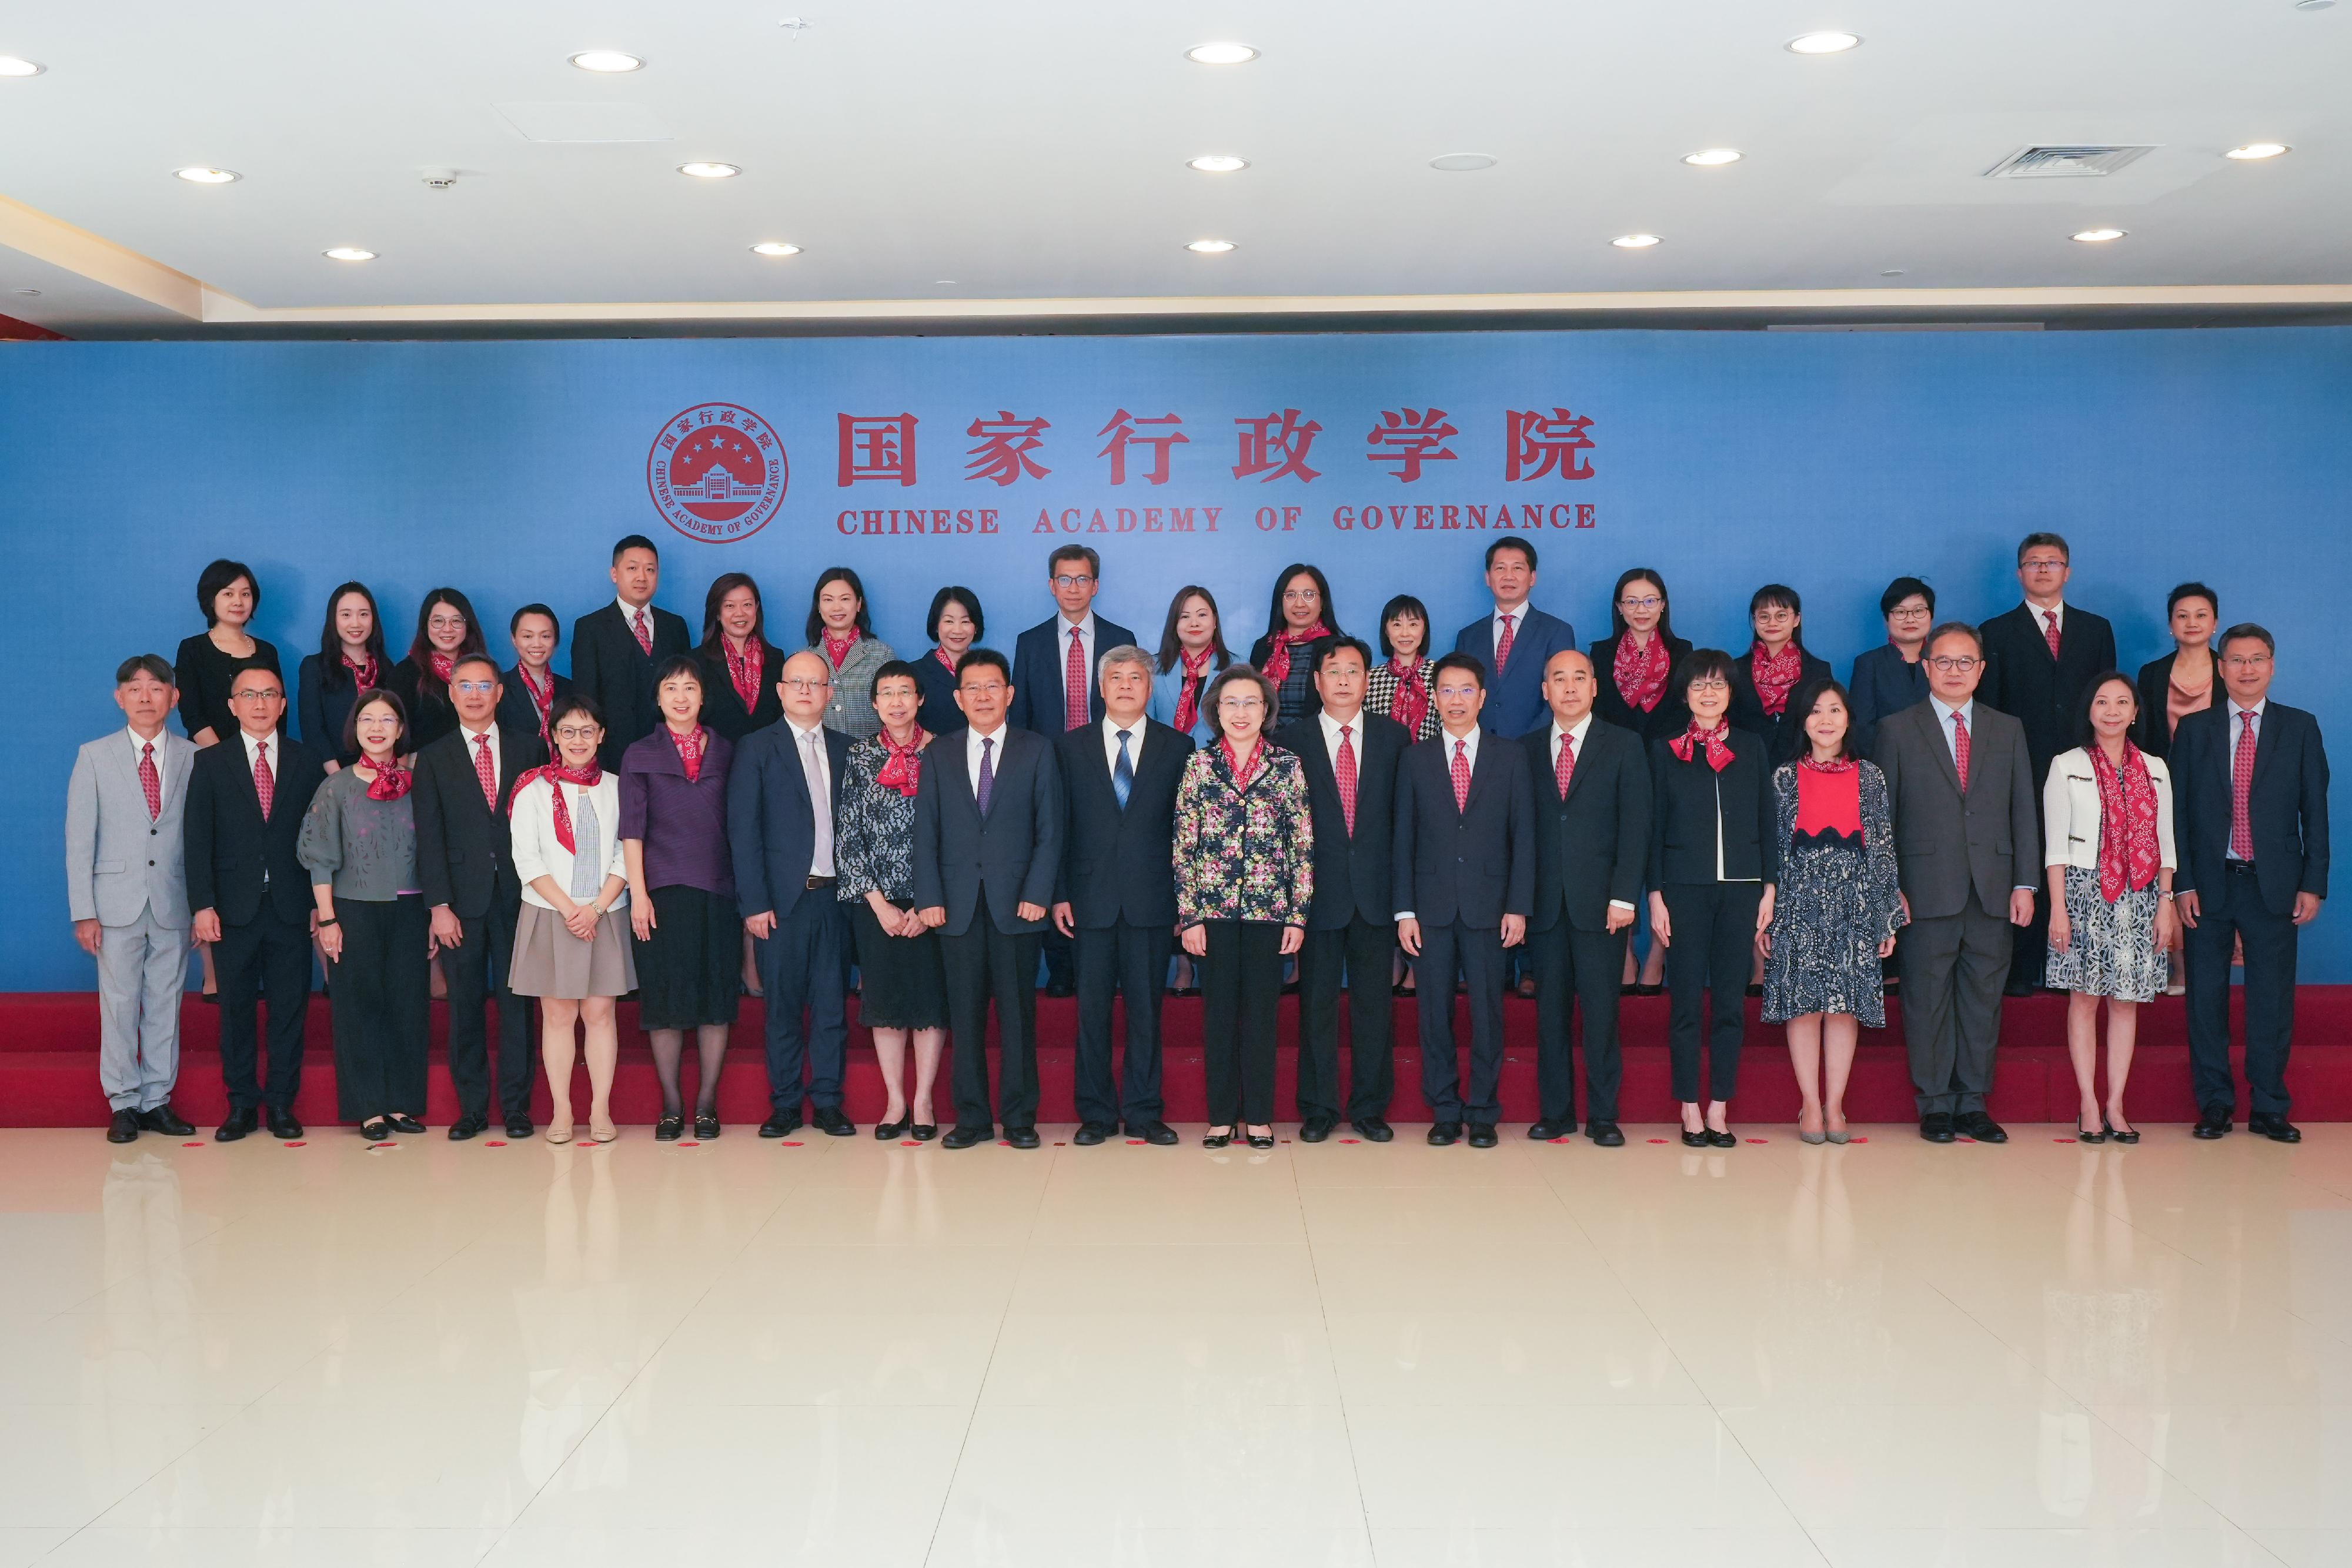 A delegation of HKSAR Government’s Permanent Secretaries and Heads of Departments for study and duty visit attended their study programme at the National Academy of Governance (NAG) this morning (June 26). Photo shows the Executive Vice President of the NAG in charge of daily operations, Mr Xie Chuntao (front row, centre), and Deputy Director of the Hong Kong and Macao Affairs Office of the State Council Mr Wang Linggui (front row, ninth left) are pictured with the delegation.